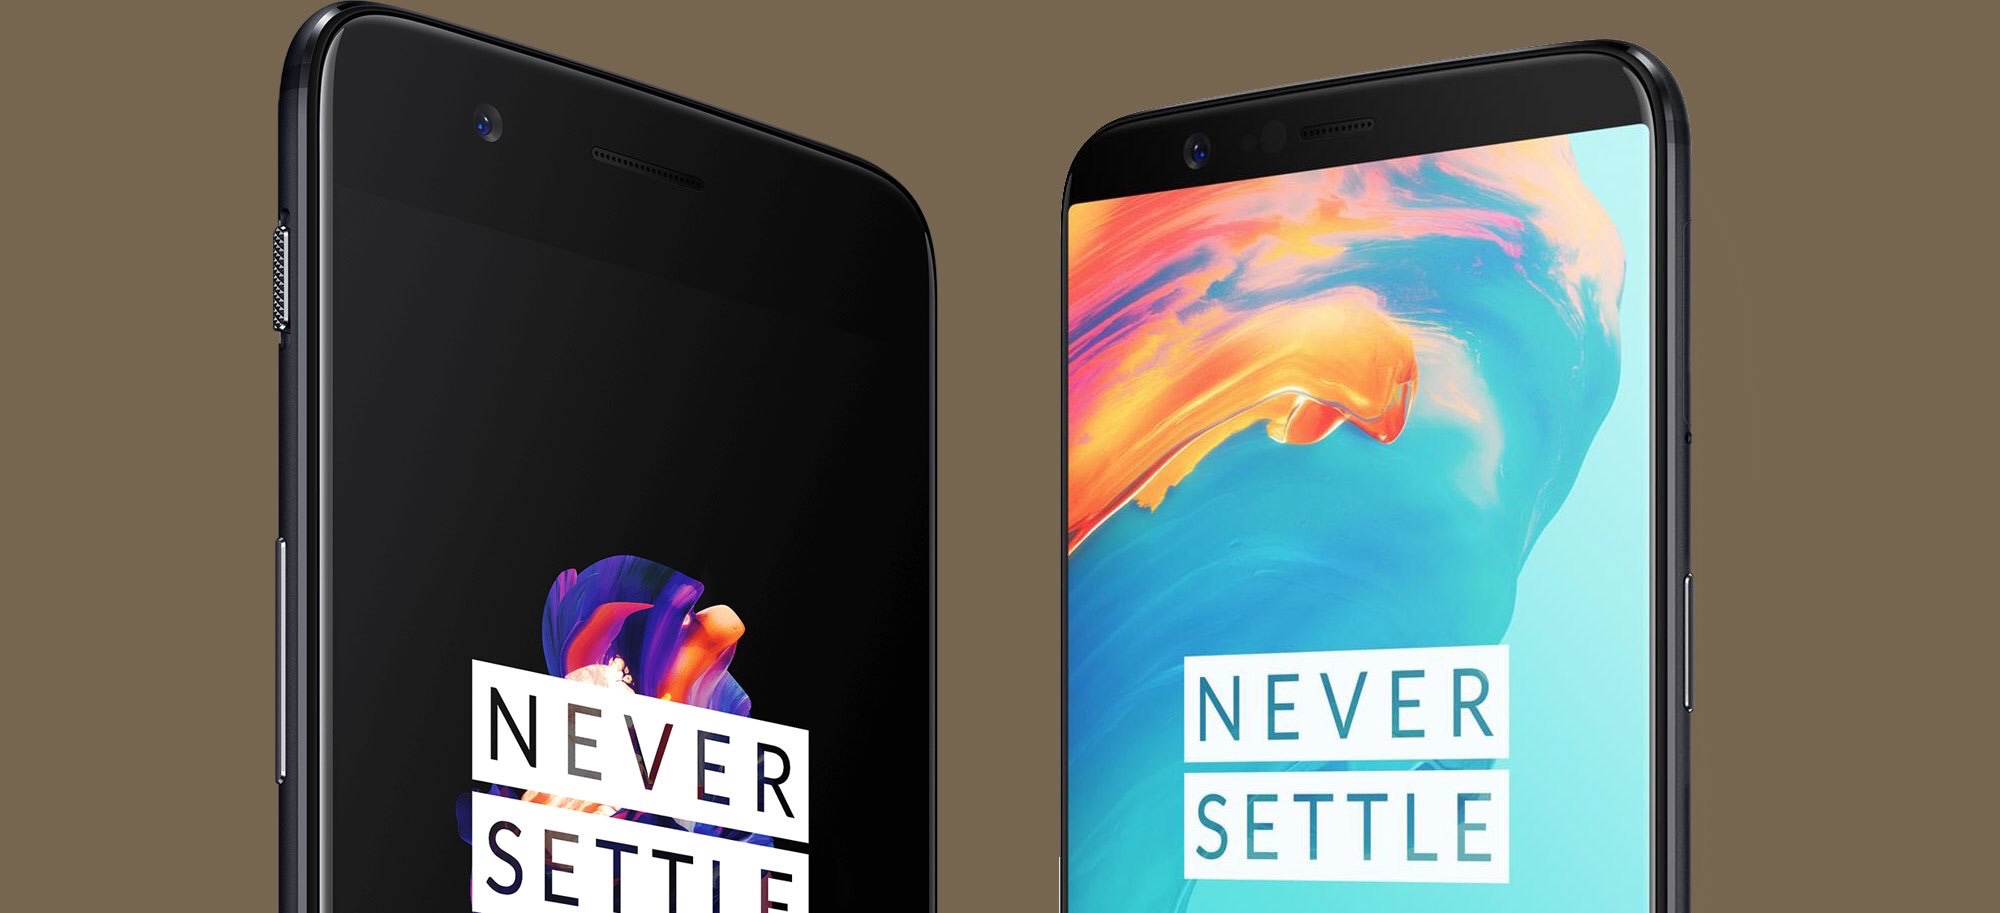 If you want OnePlus to fix HD streaming on your 5 and 5T, you’ll have to mail in your phone